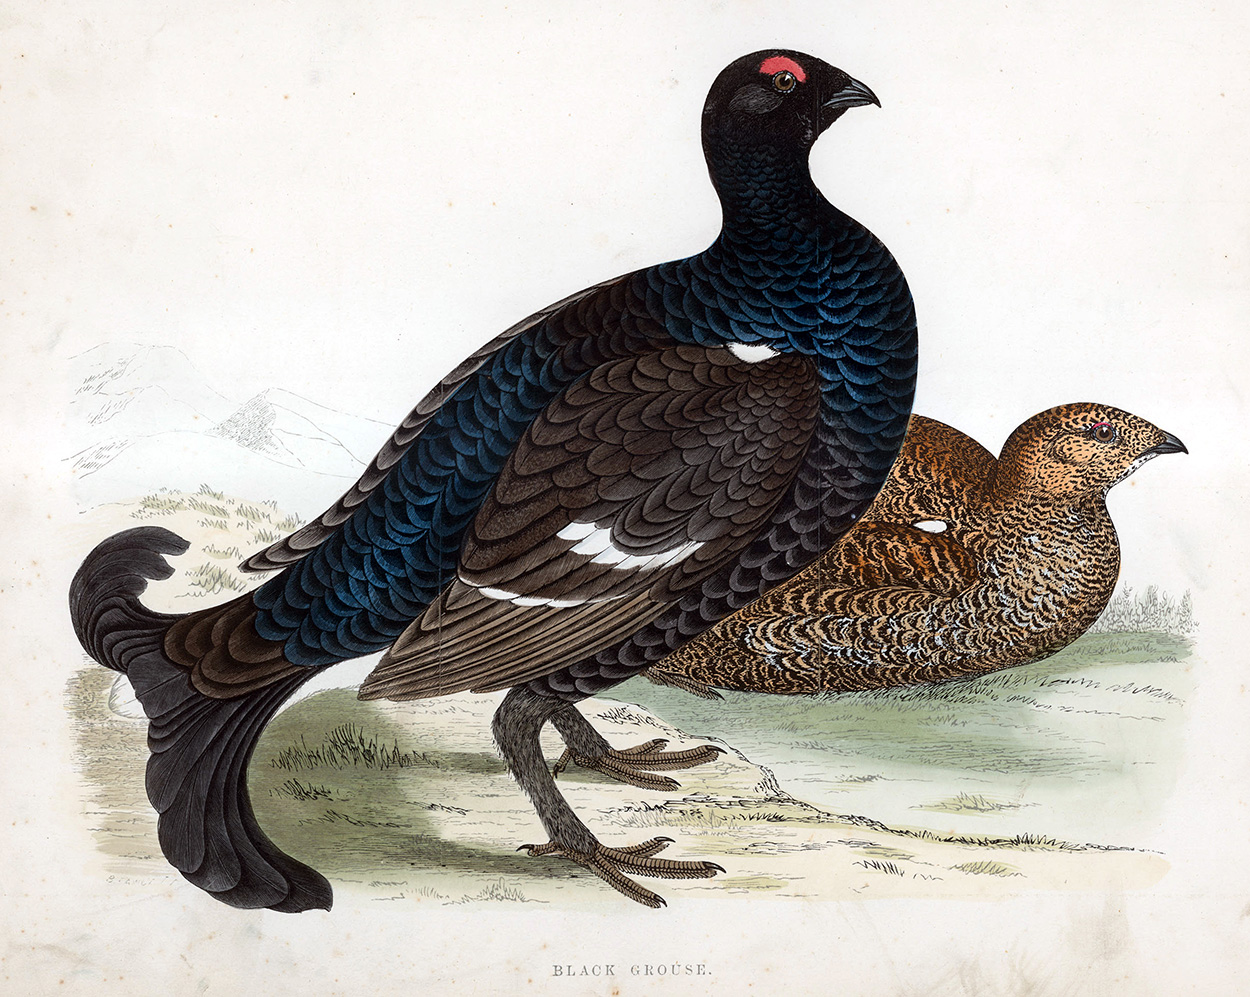 Black Grouse - hand coloured lithograph 1891 (Print) art by Beverley R Morris Art at The Illustration Art Gallery